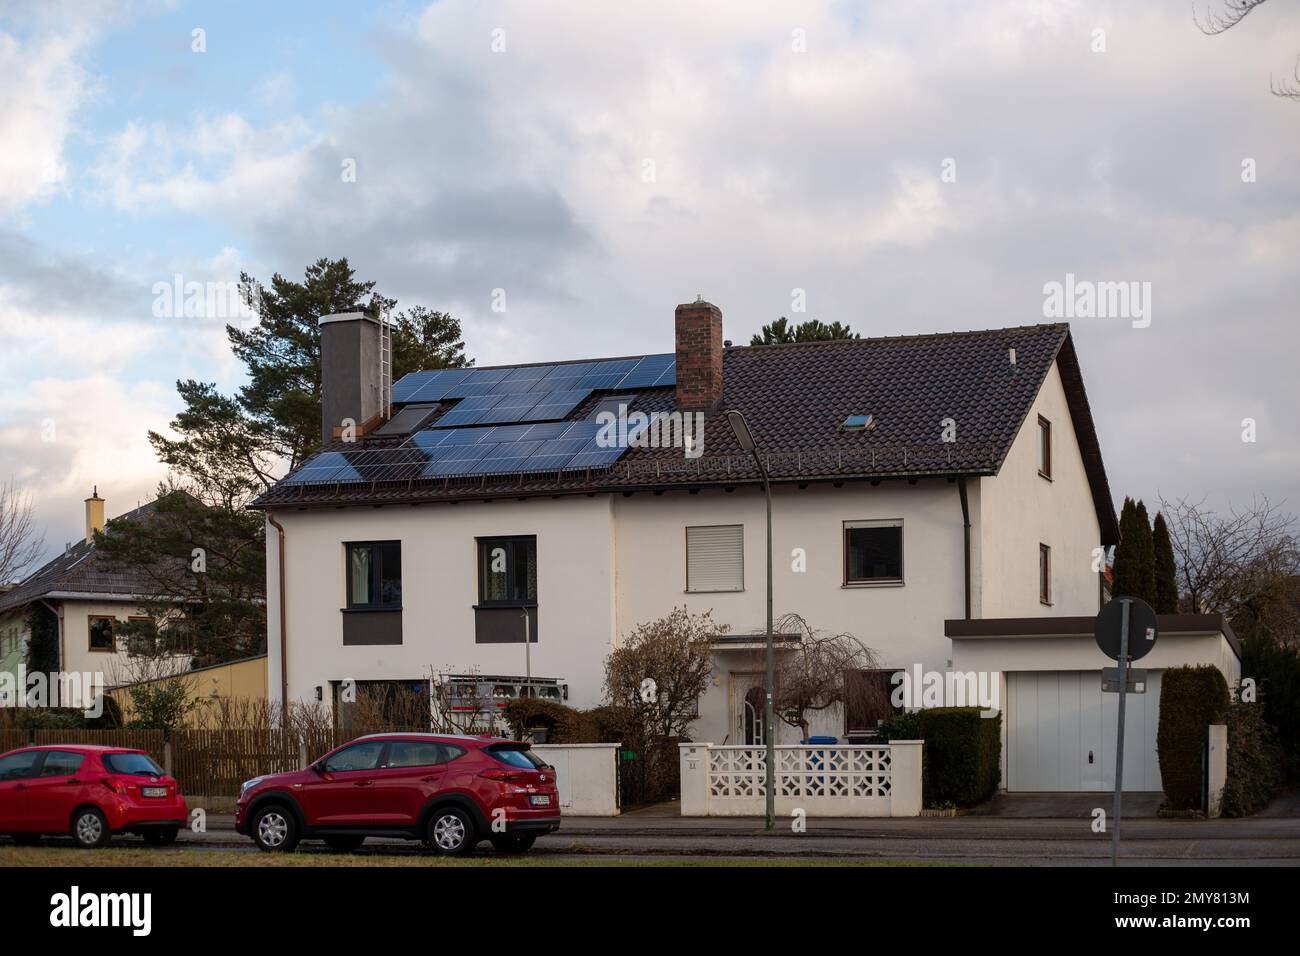 Munich, Germany. 04th Feb, 2023. Haus mit Photovoltaikanlage auf dem Dach am 4.2.2023 in München. Mieten steigen, Immobilienpreise sinken. -- Residential property with solar panels on the roof seen on February 4, 2023 in Munich, Germany. (Photo by Alexander Pohl/Sipa USA) Credit: Sipa USA/Alamy Live News Stock Photo